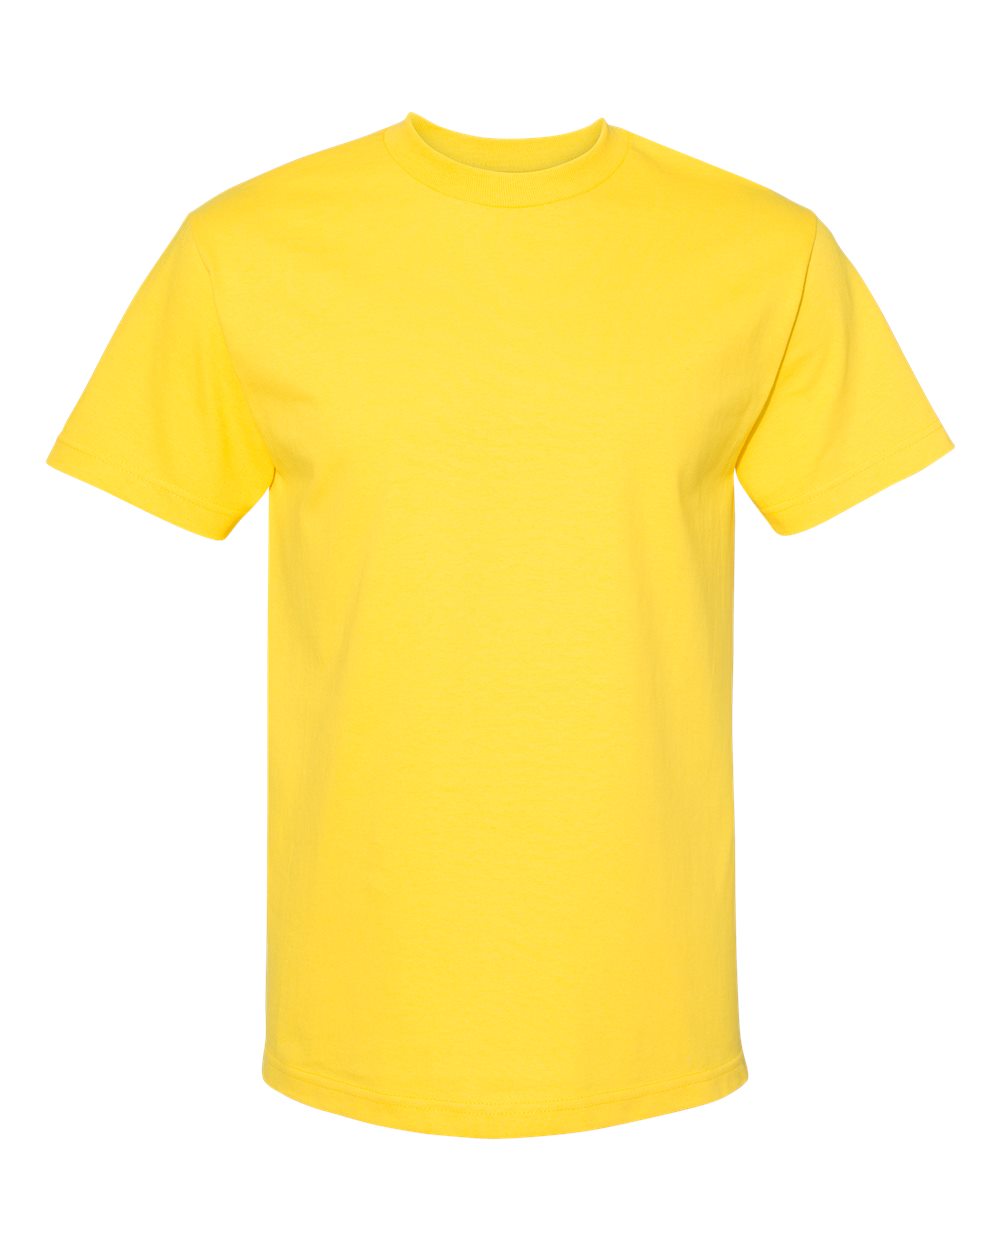 American Apparel Unisex Heavyweight Cotton Tee 1301 #color_Yellow